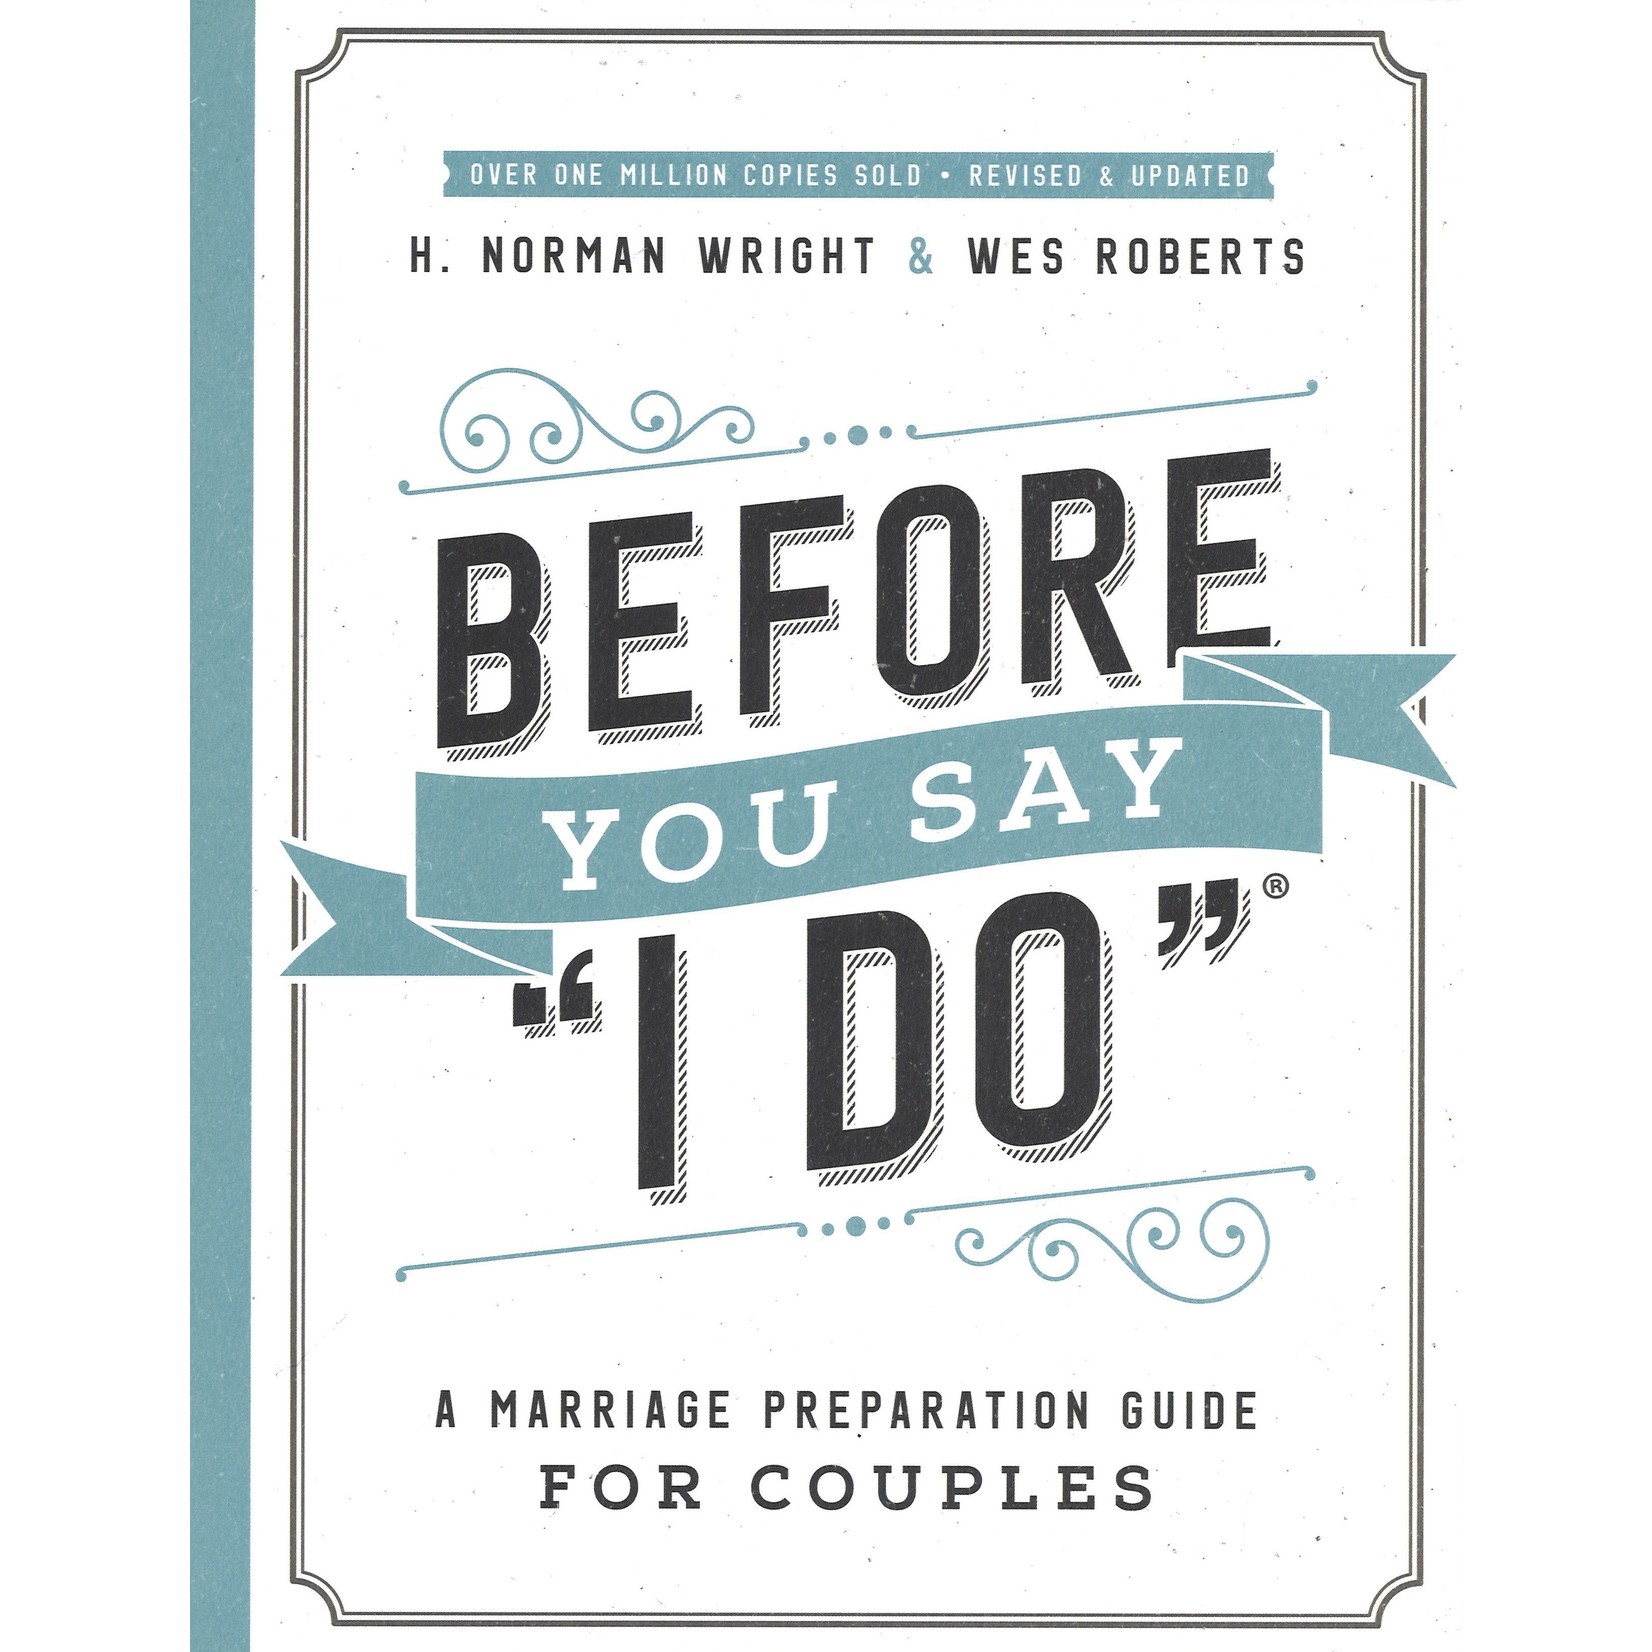 BEFORE YOU SAY “I DO”